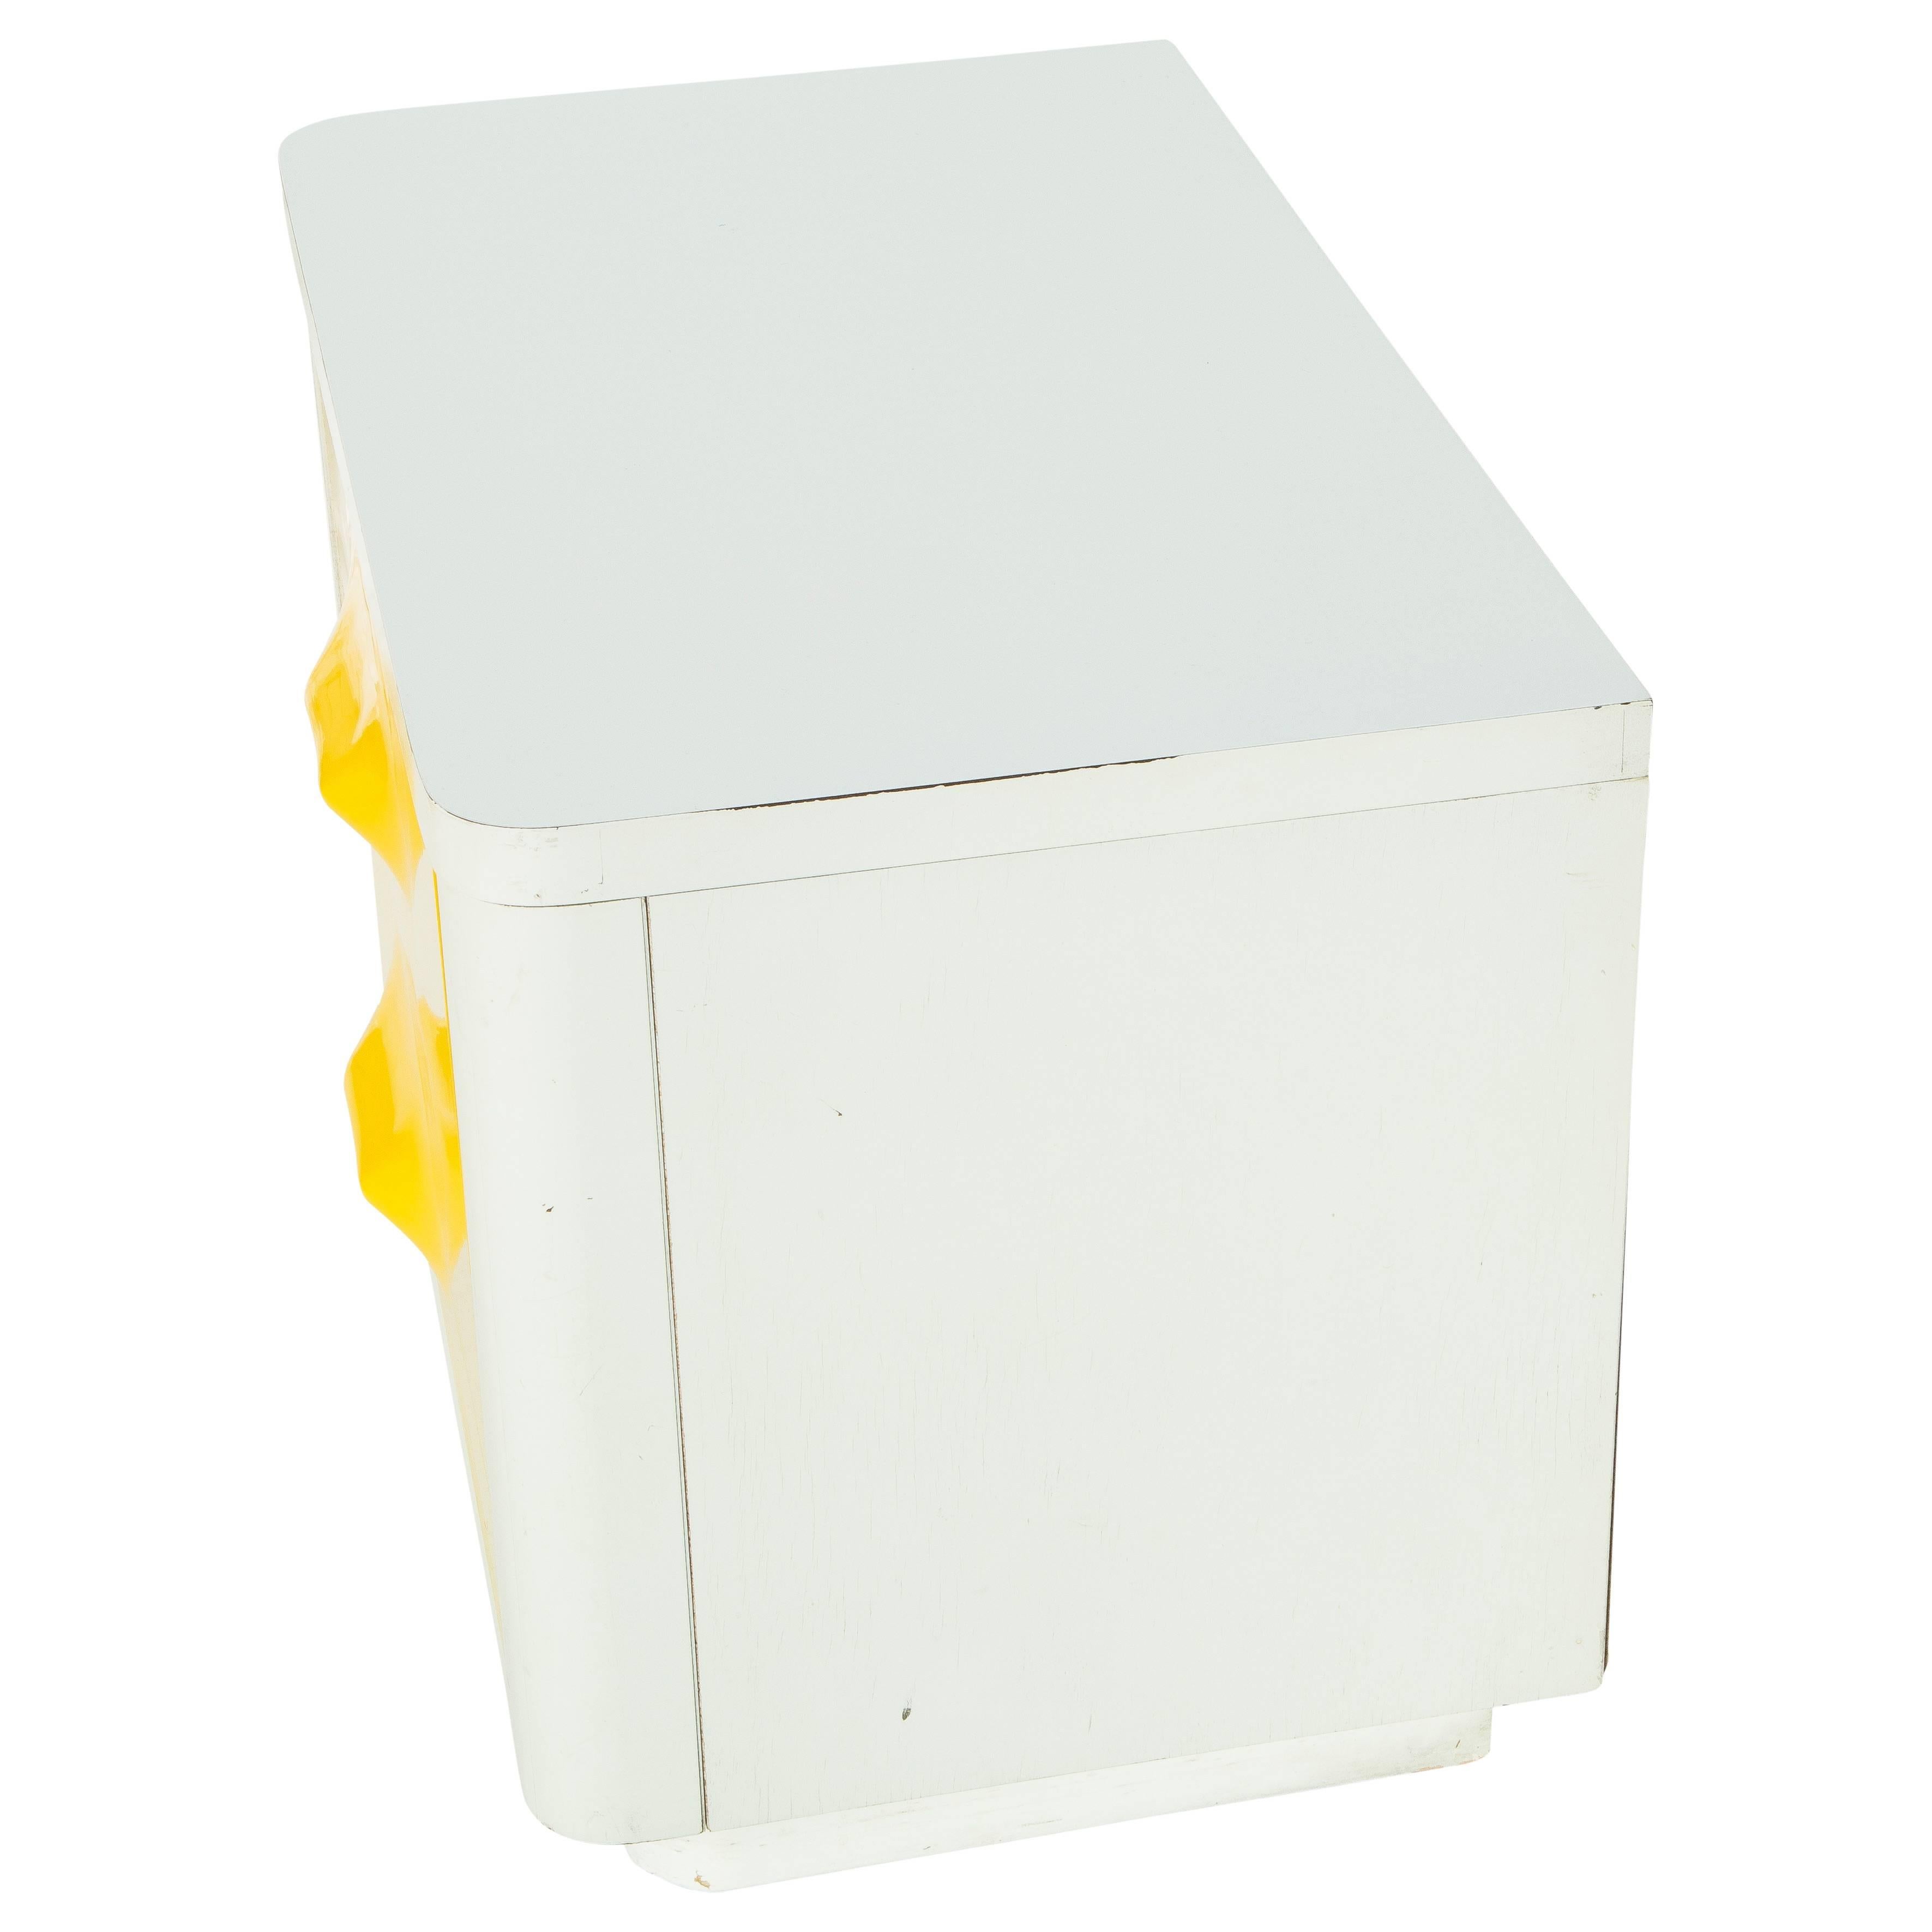 White and yellow Raymond Loewy nightstand in the style of Mod-Pop industrial design, circa 1970s. The white body of the credenza is lacquered wood, and the vibrant yellow drawers are molded plastic. Two drawers, in great condition inside and out. A